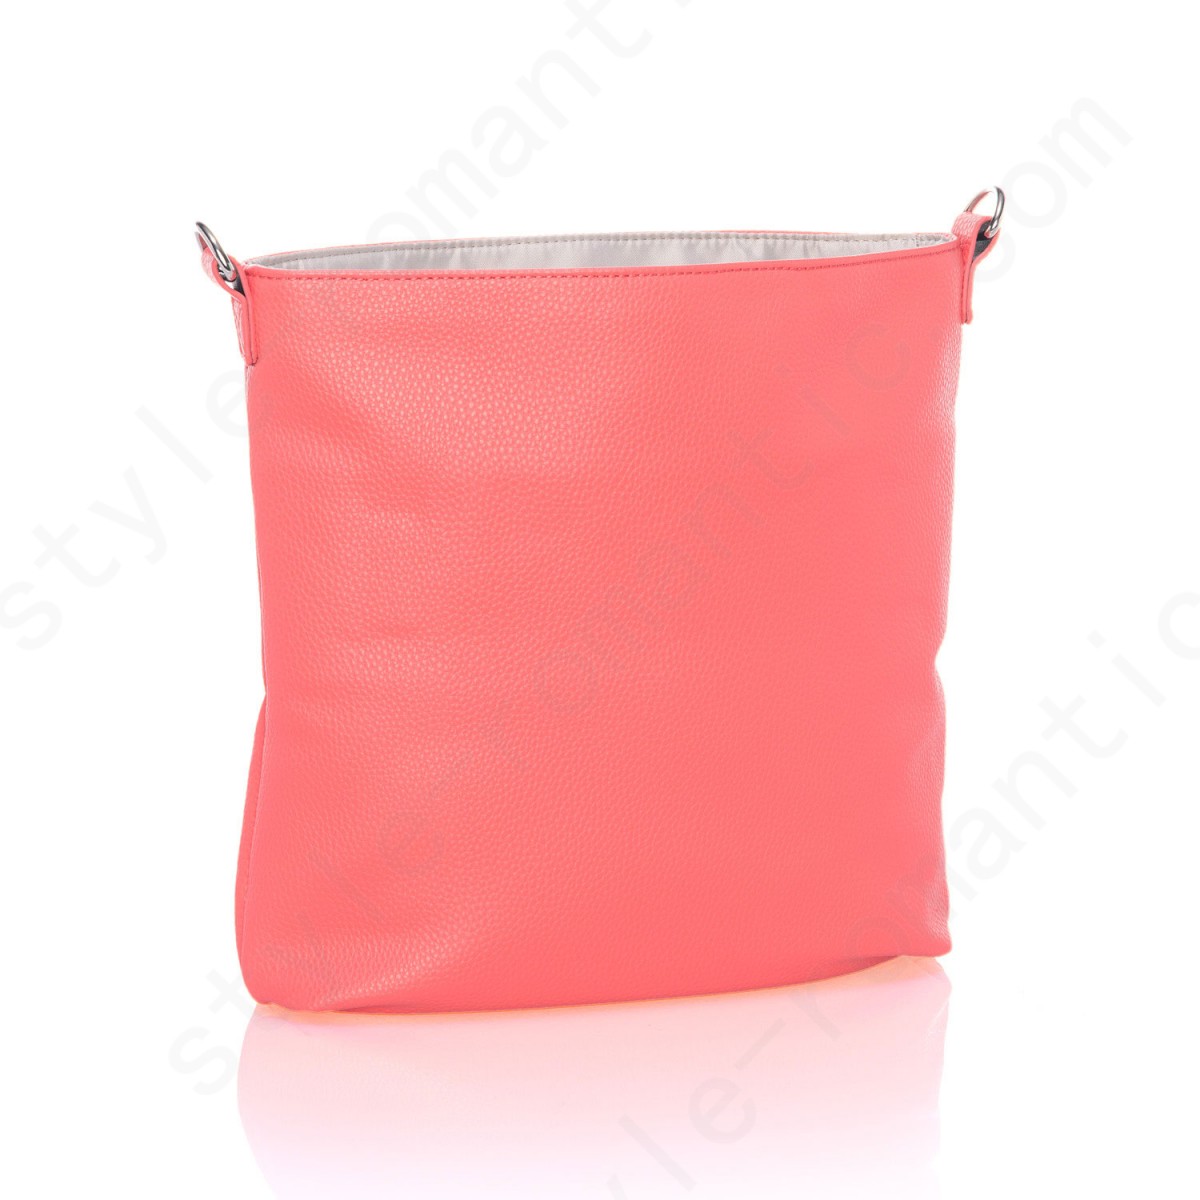 Thirty-One Gifts Studio Thirty-One Modern Body - Calypso Coral Pebble Bag Accessories - -0